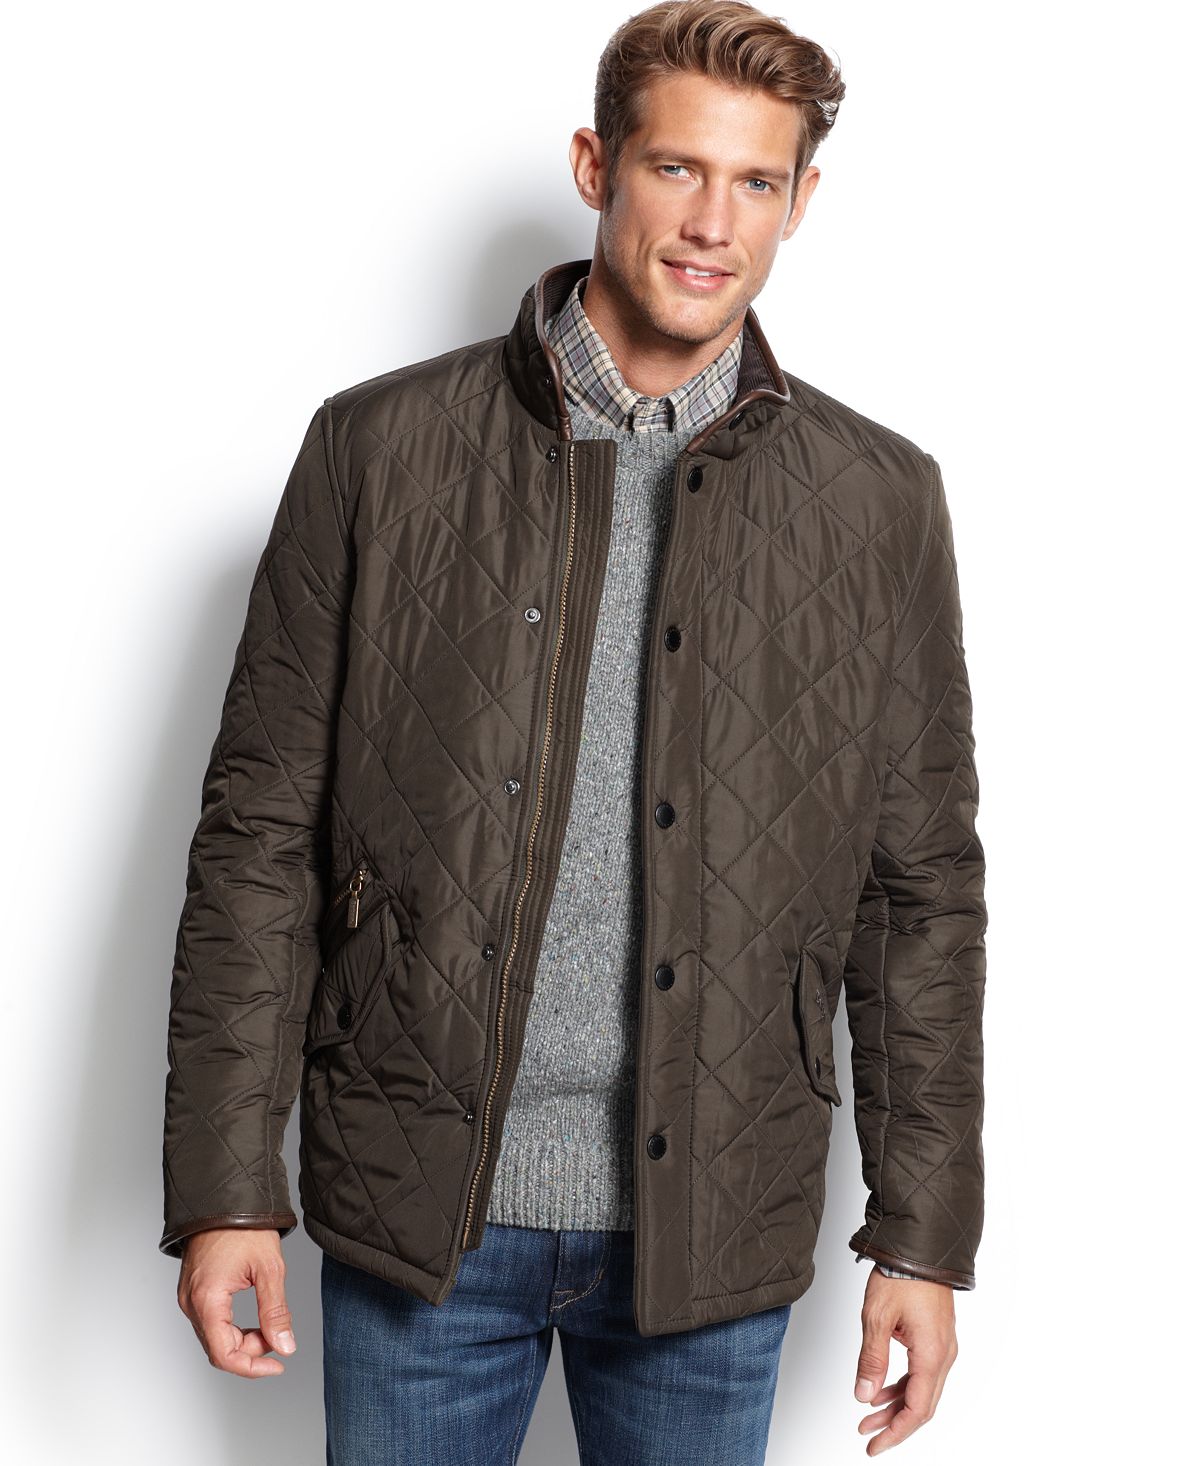 Barbour Powell Quilted Jacket. Barbour Jacket. Куртка Barbour mqu0717ny71. Стеганка Barbour. Куртка barbour мужская